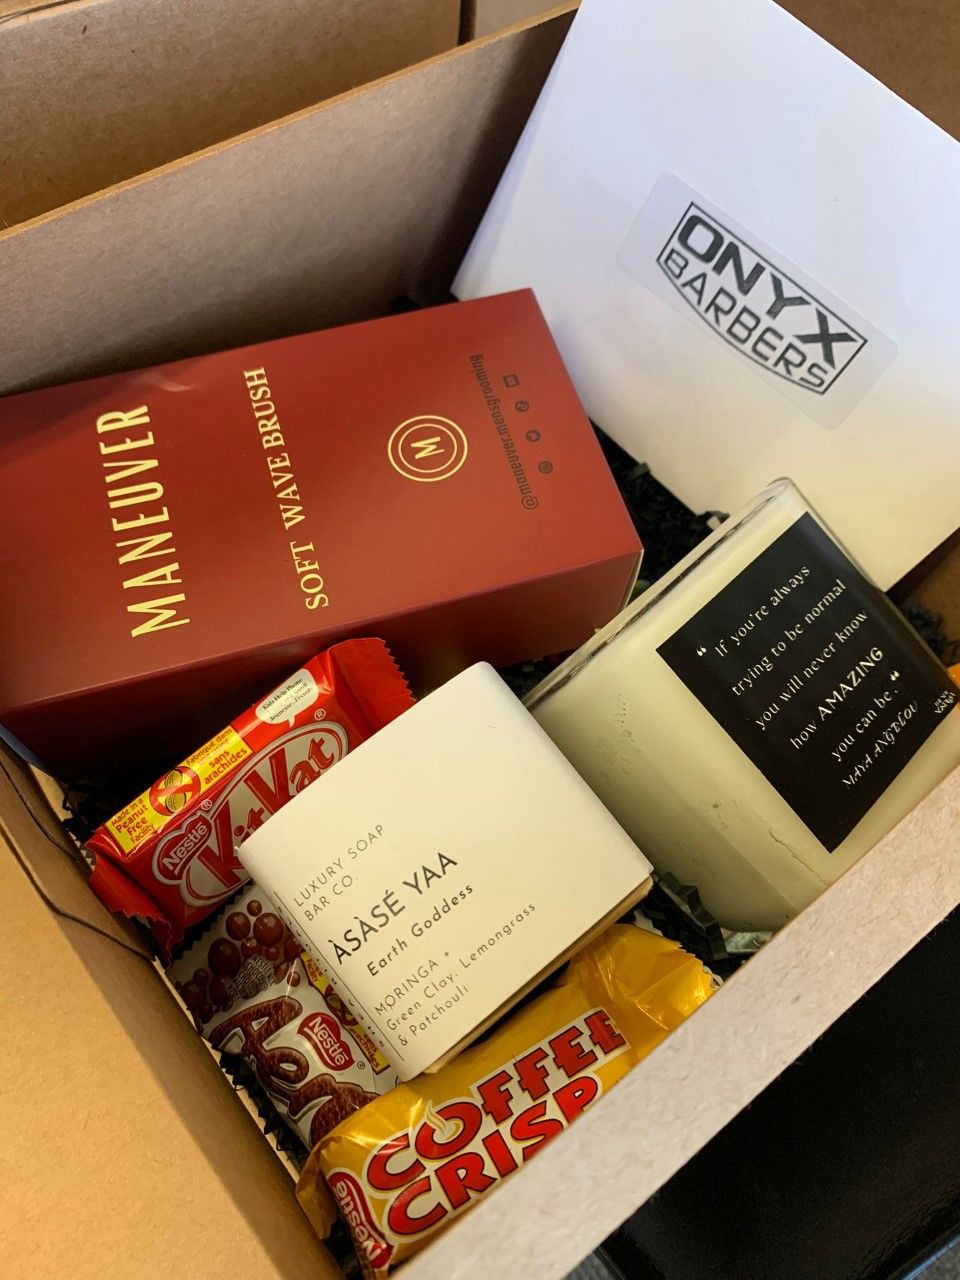 We used the proceeds from our Mental Health Fundraiser to purchase self-care items from Black owned and local business to create these packages for our participants in community (October 2021)